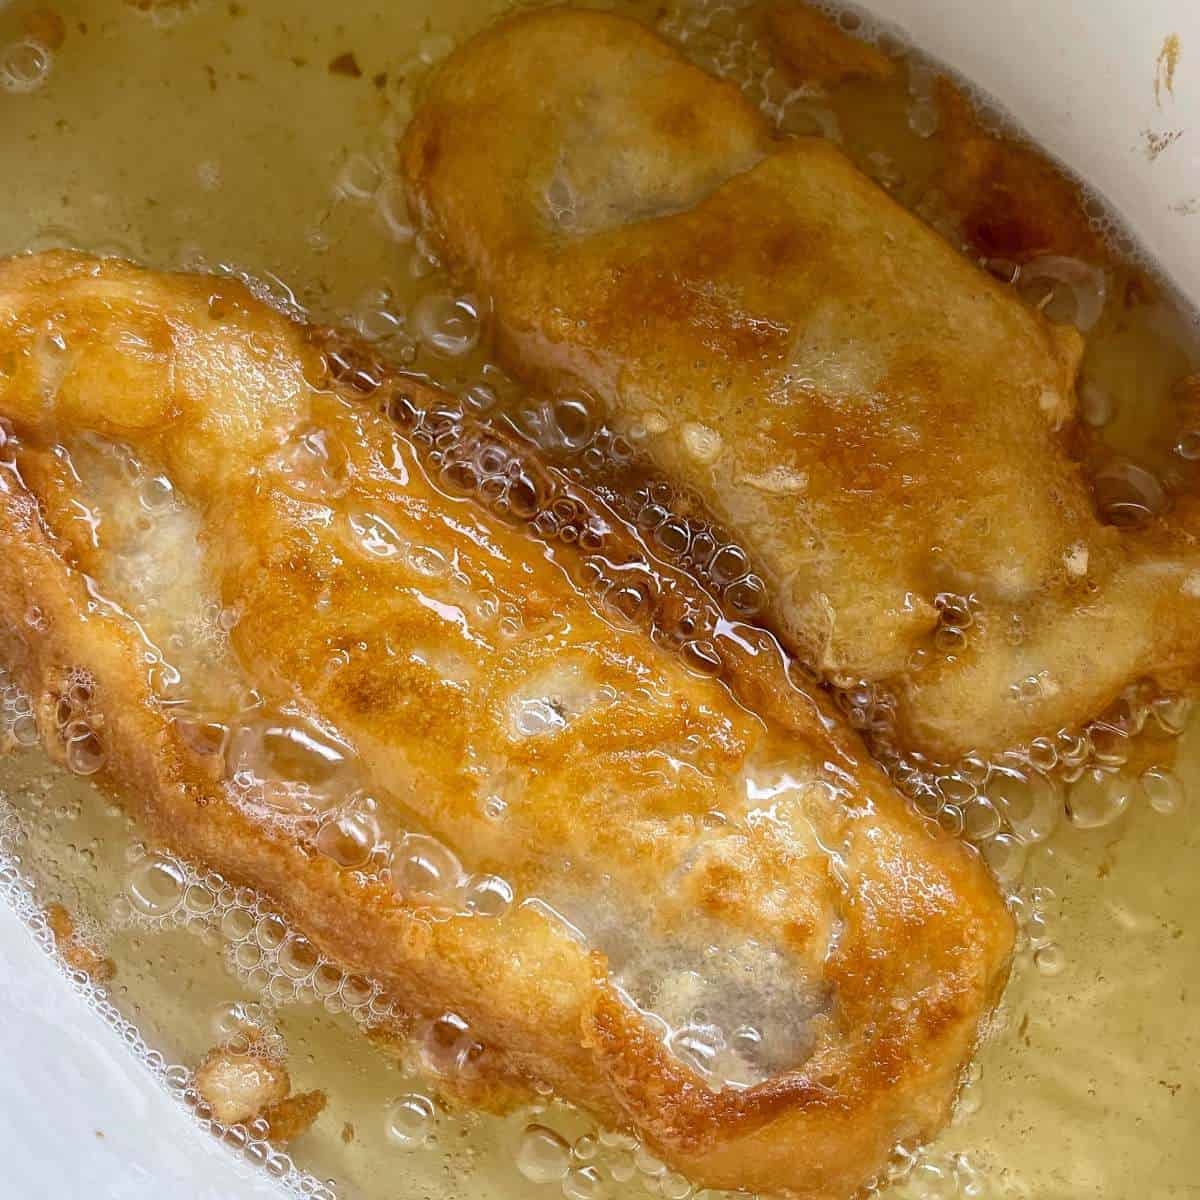 Two pieces of battered fished being gently fried in oil.